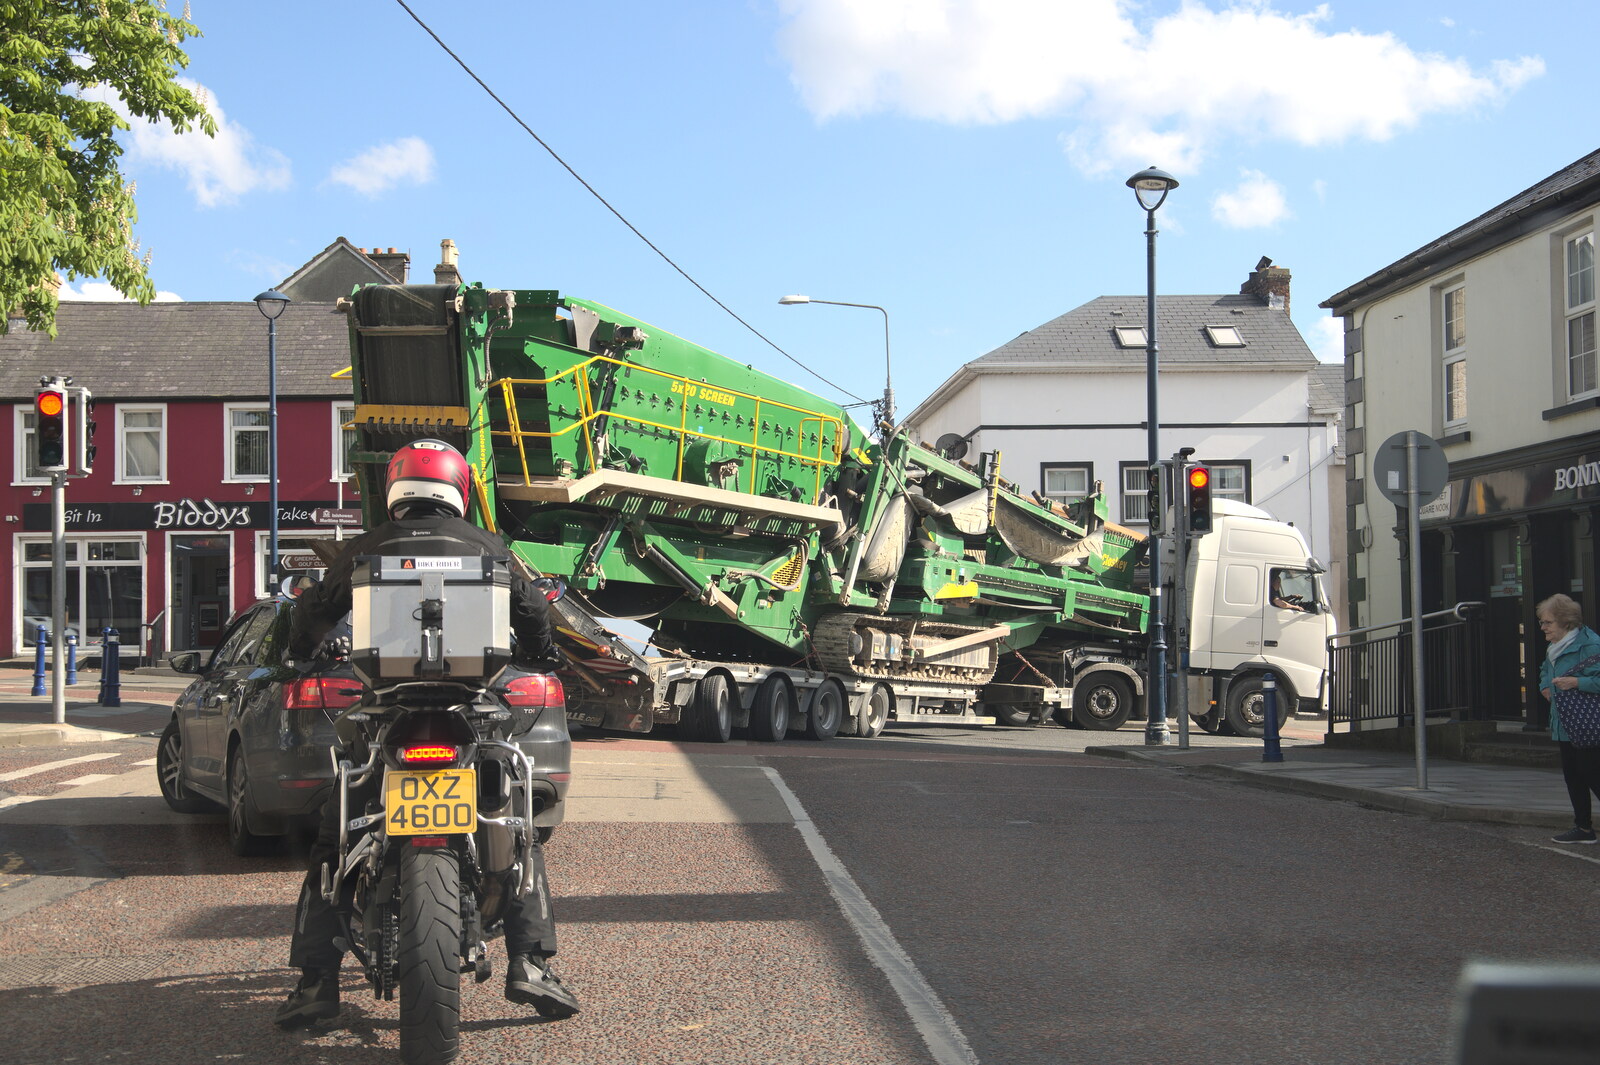 Greencastle, Doagh and Malin Head, County Donegal, Ireland - 19th April 2022: A huge harvester gets stuck in Moville